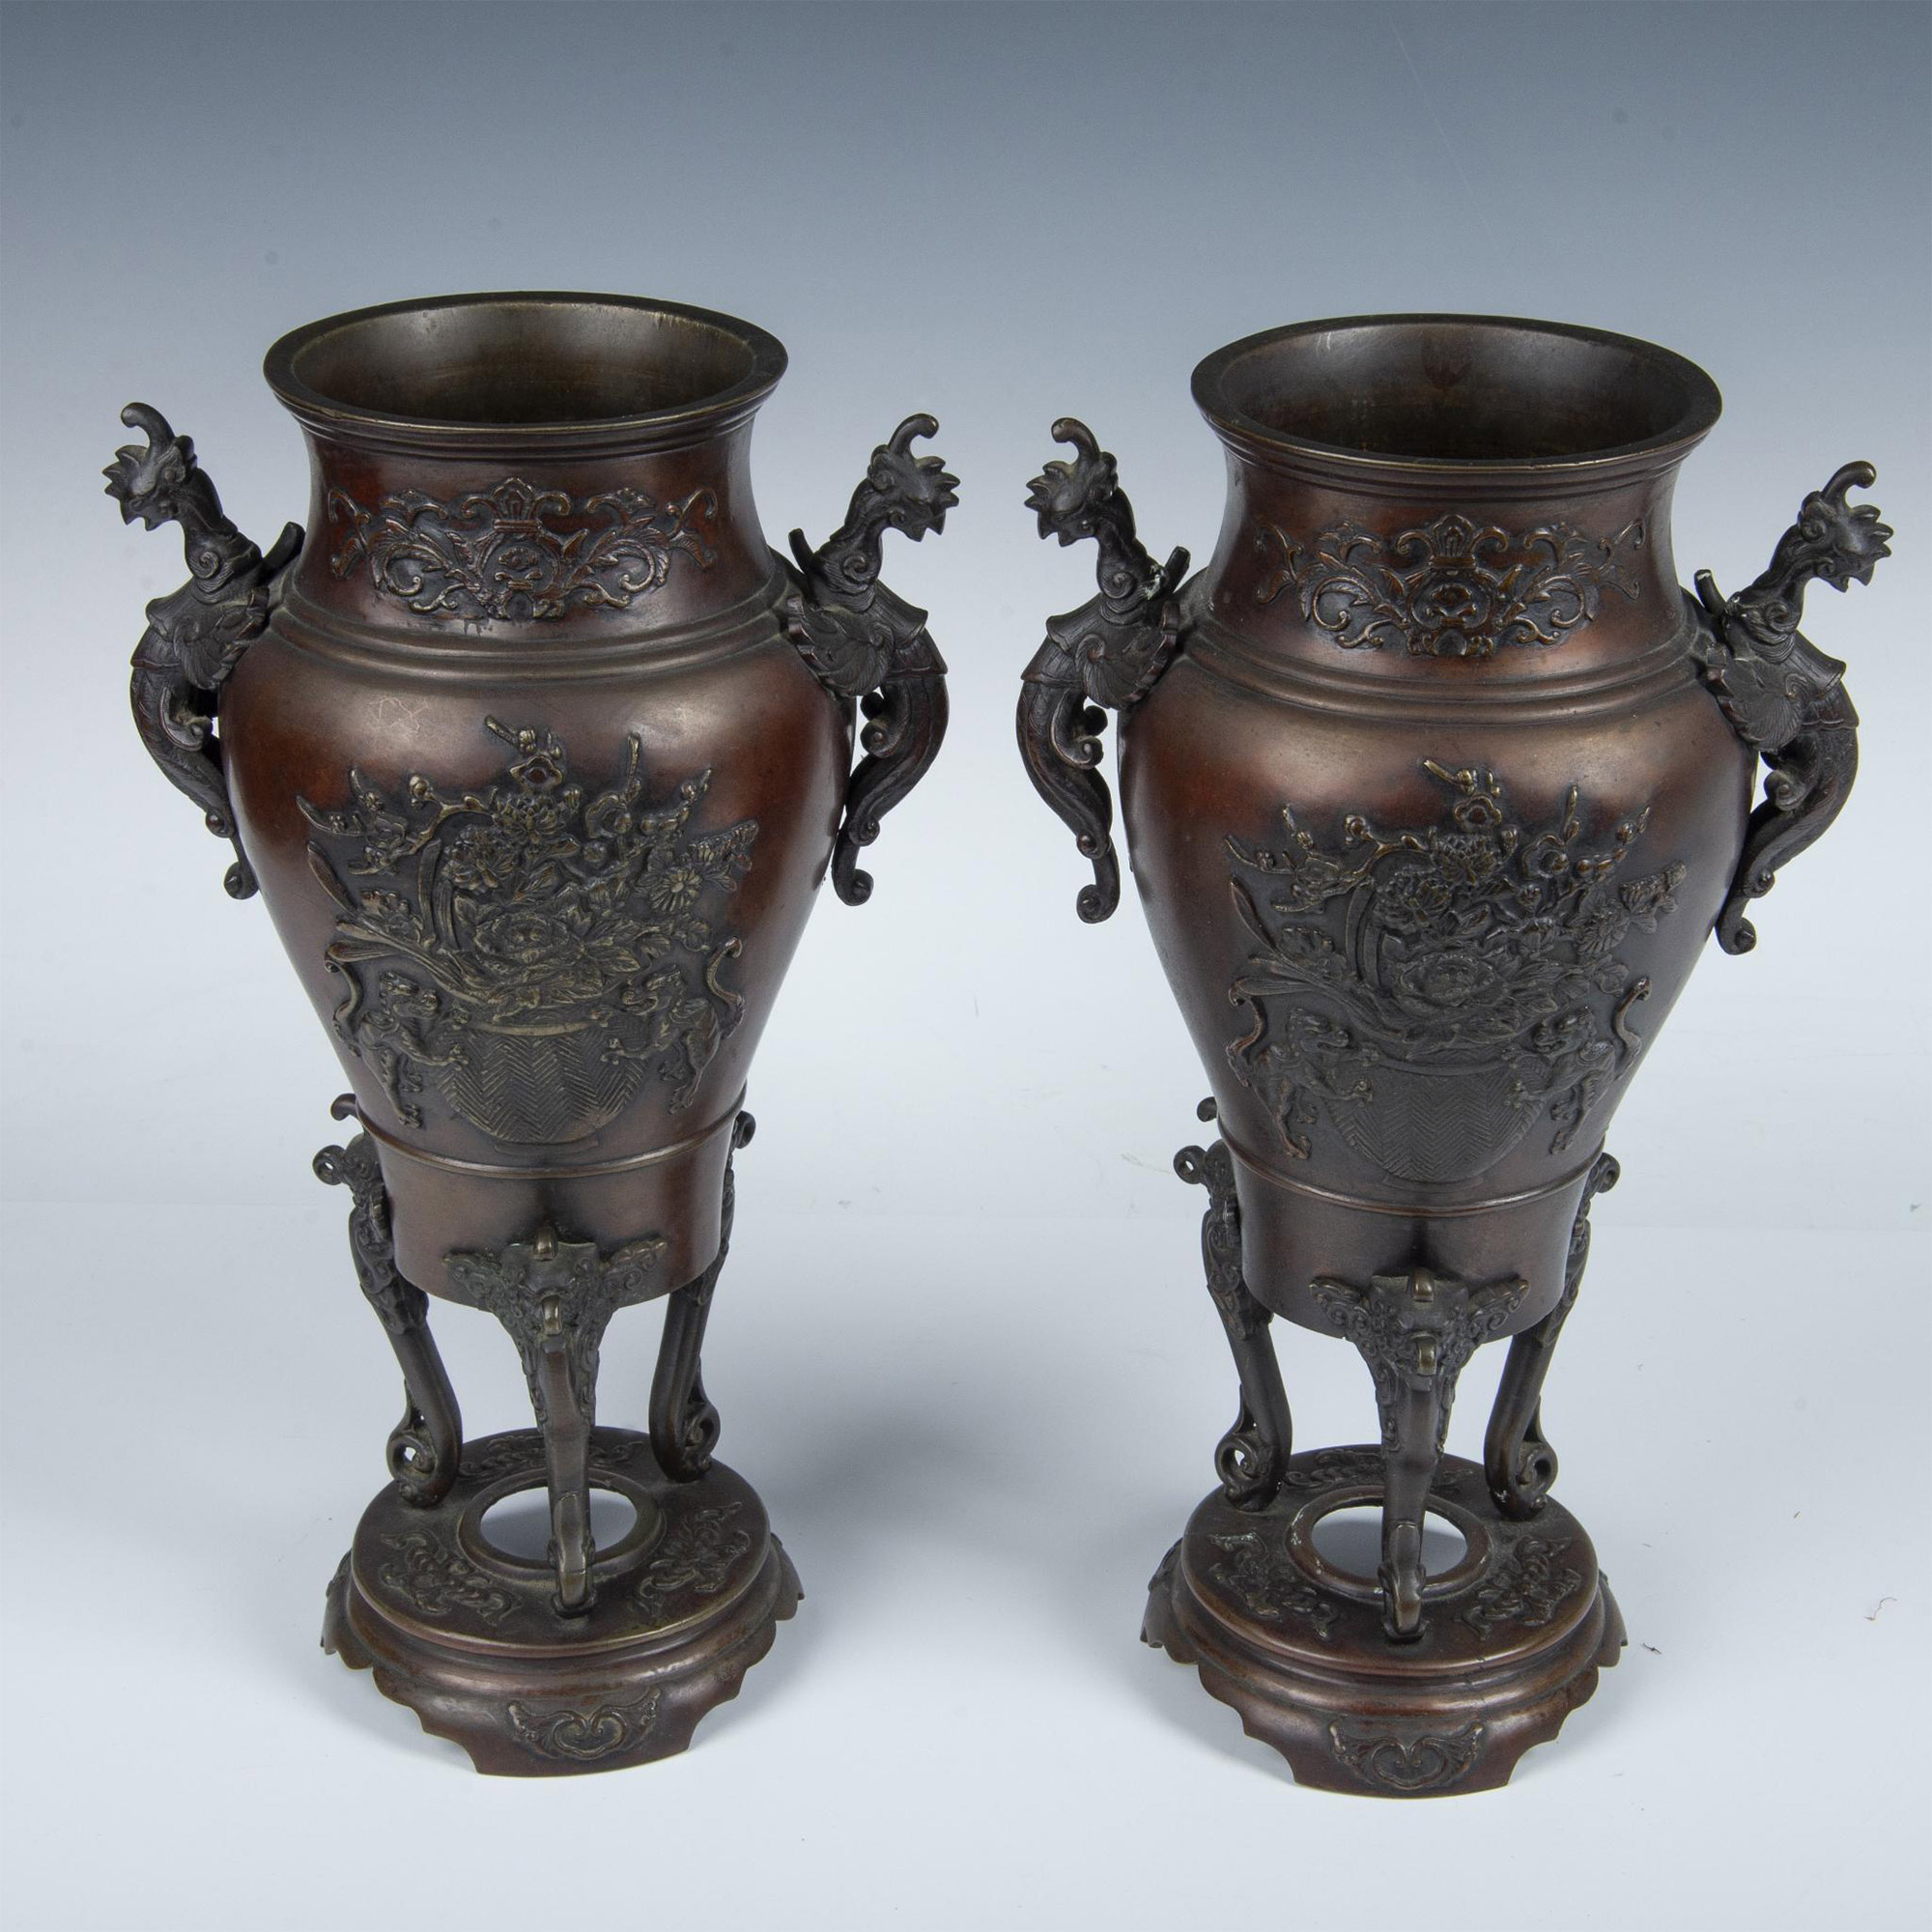 Pair of Antique Japanese Bronze Urns with Griffins Designs - Image 2 of 7